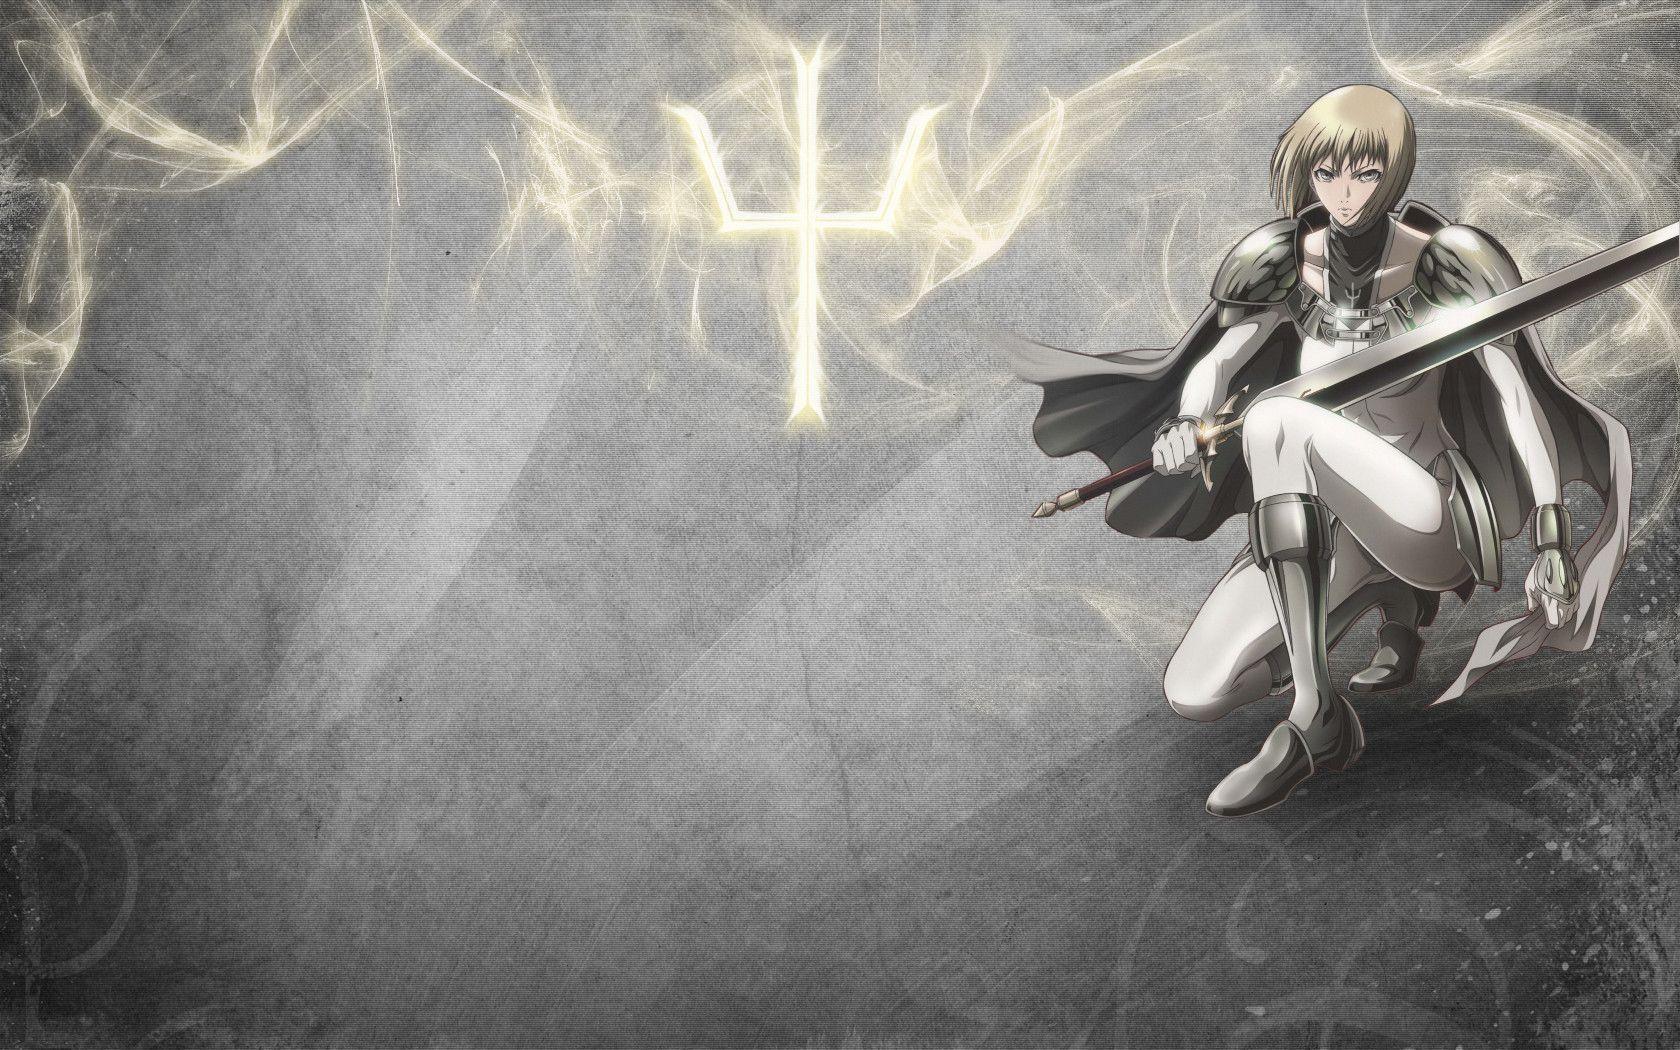 Wallpaper ID 474885  Anime Claymore Phone Wallpaper  720x1280 free  download